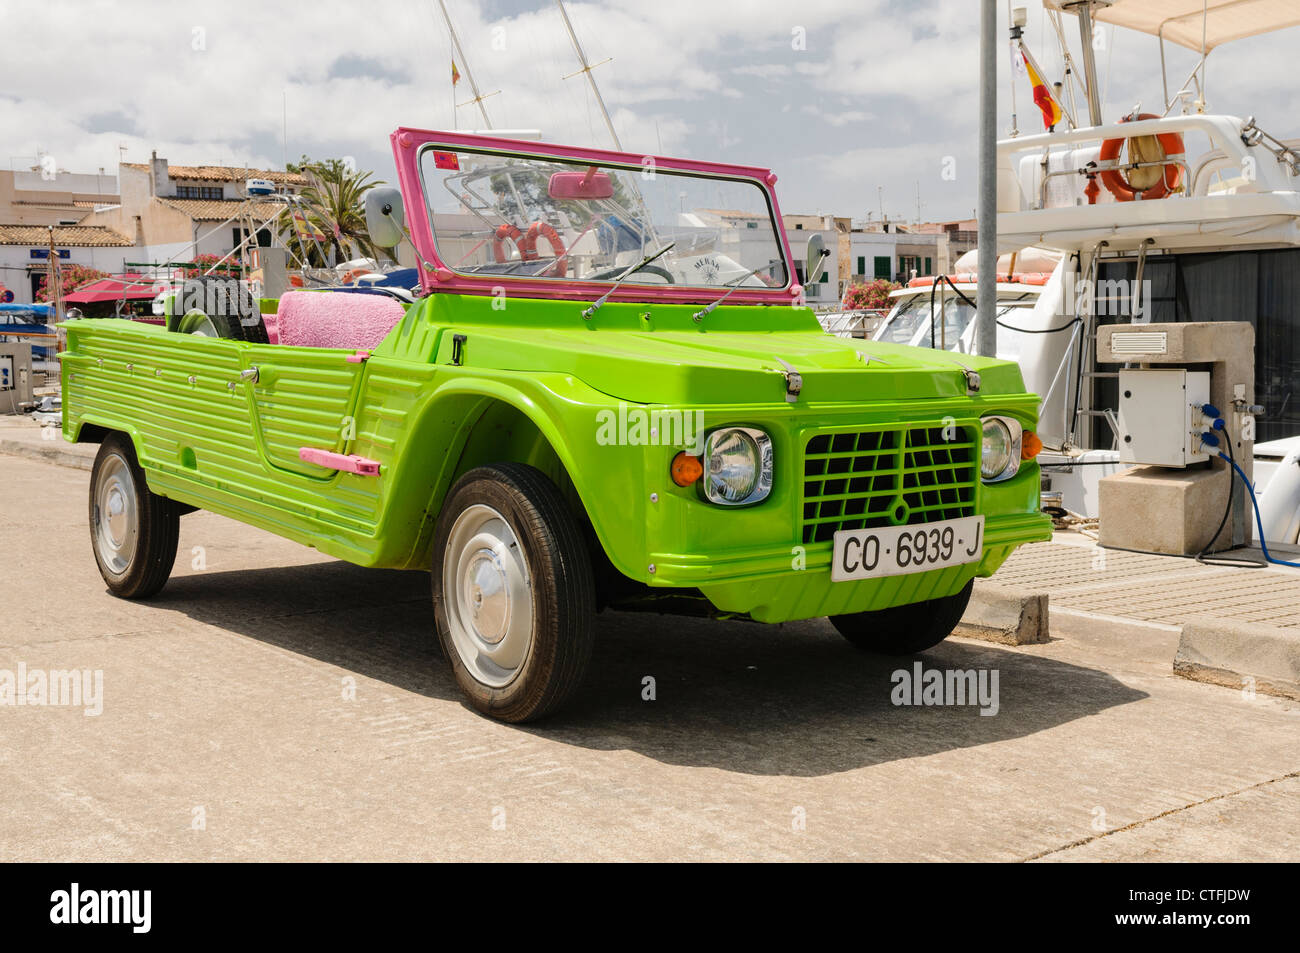 Citroën Méhari off-road jeep in fluorescent green and pink. Body is made from ABS plastic. Chassis from 2CV. Stock Photo